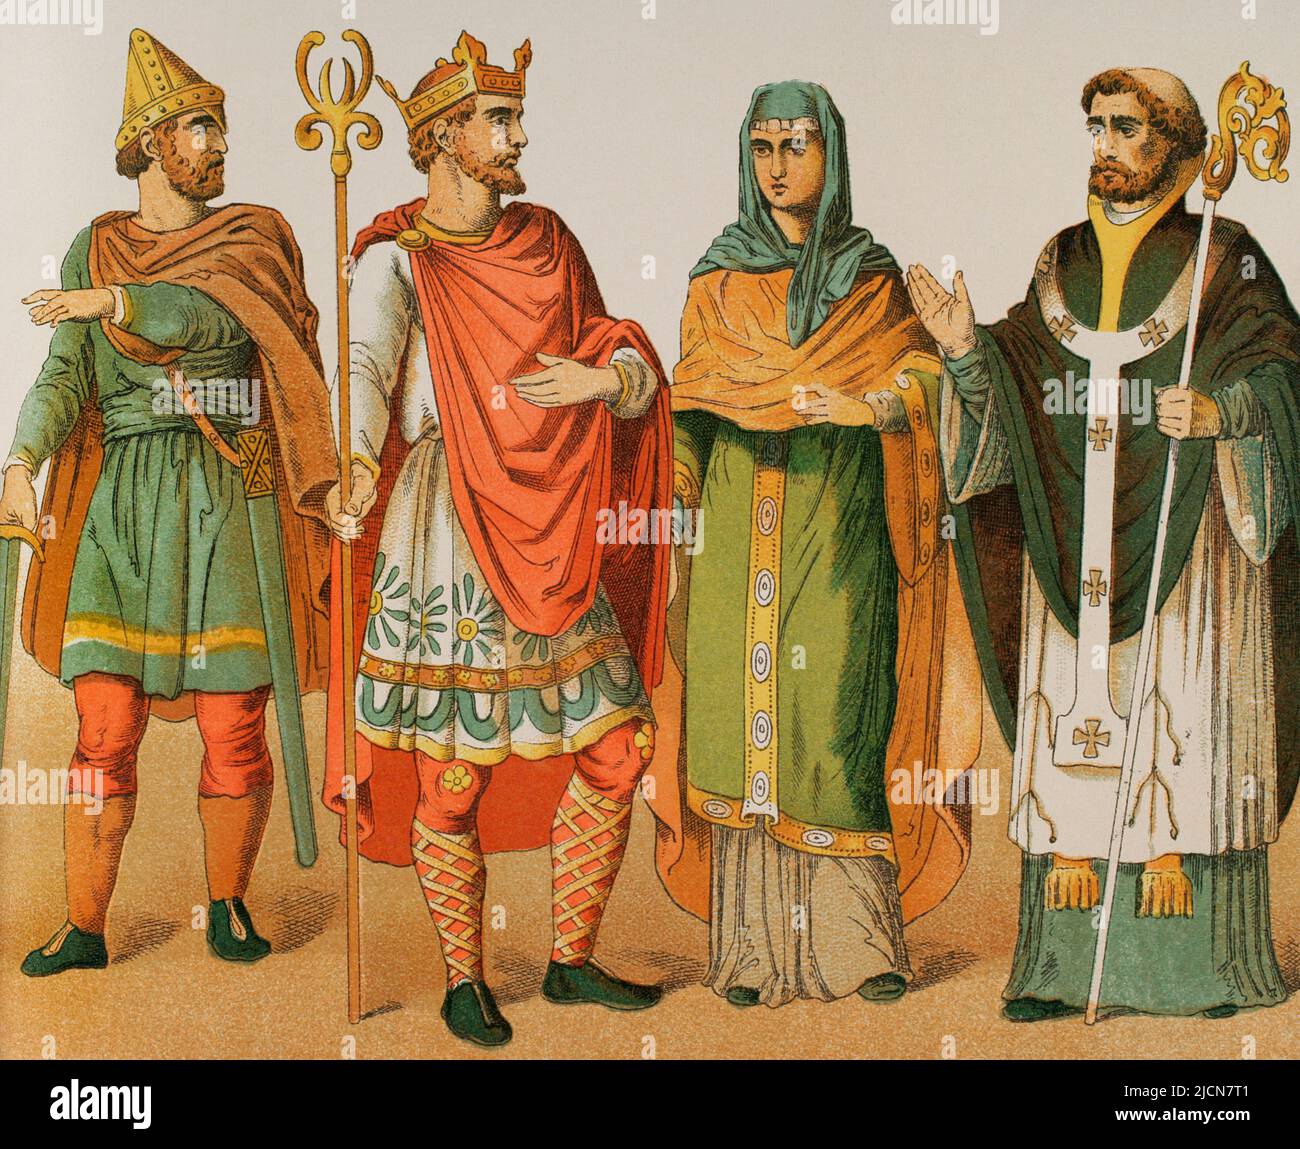 Anglo-Saxons (500-1000). From left to right, 9: Military chief, 10: King (966), 11: Noblewoman (850), 12: Bishop (900). Chromolithography. 'Historia Universal' (Universal History), by César Cantú. Volume IV. Published in Barcelona, 1881. Stock Photo